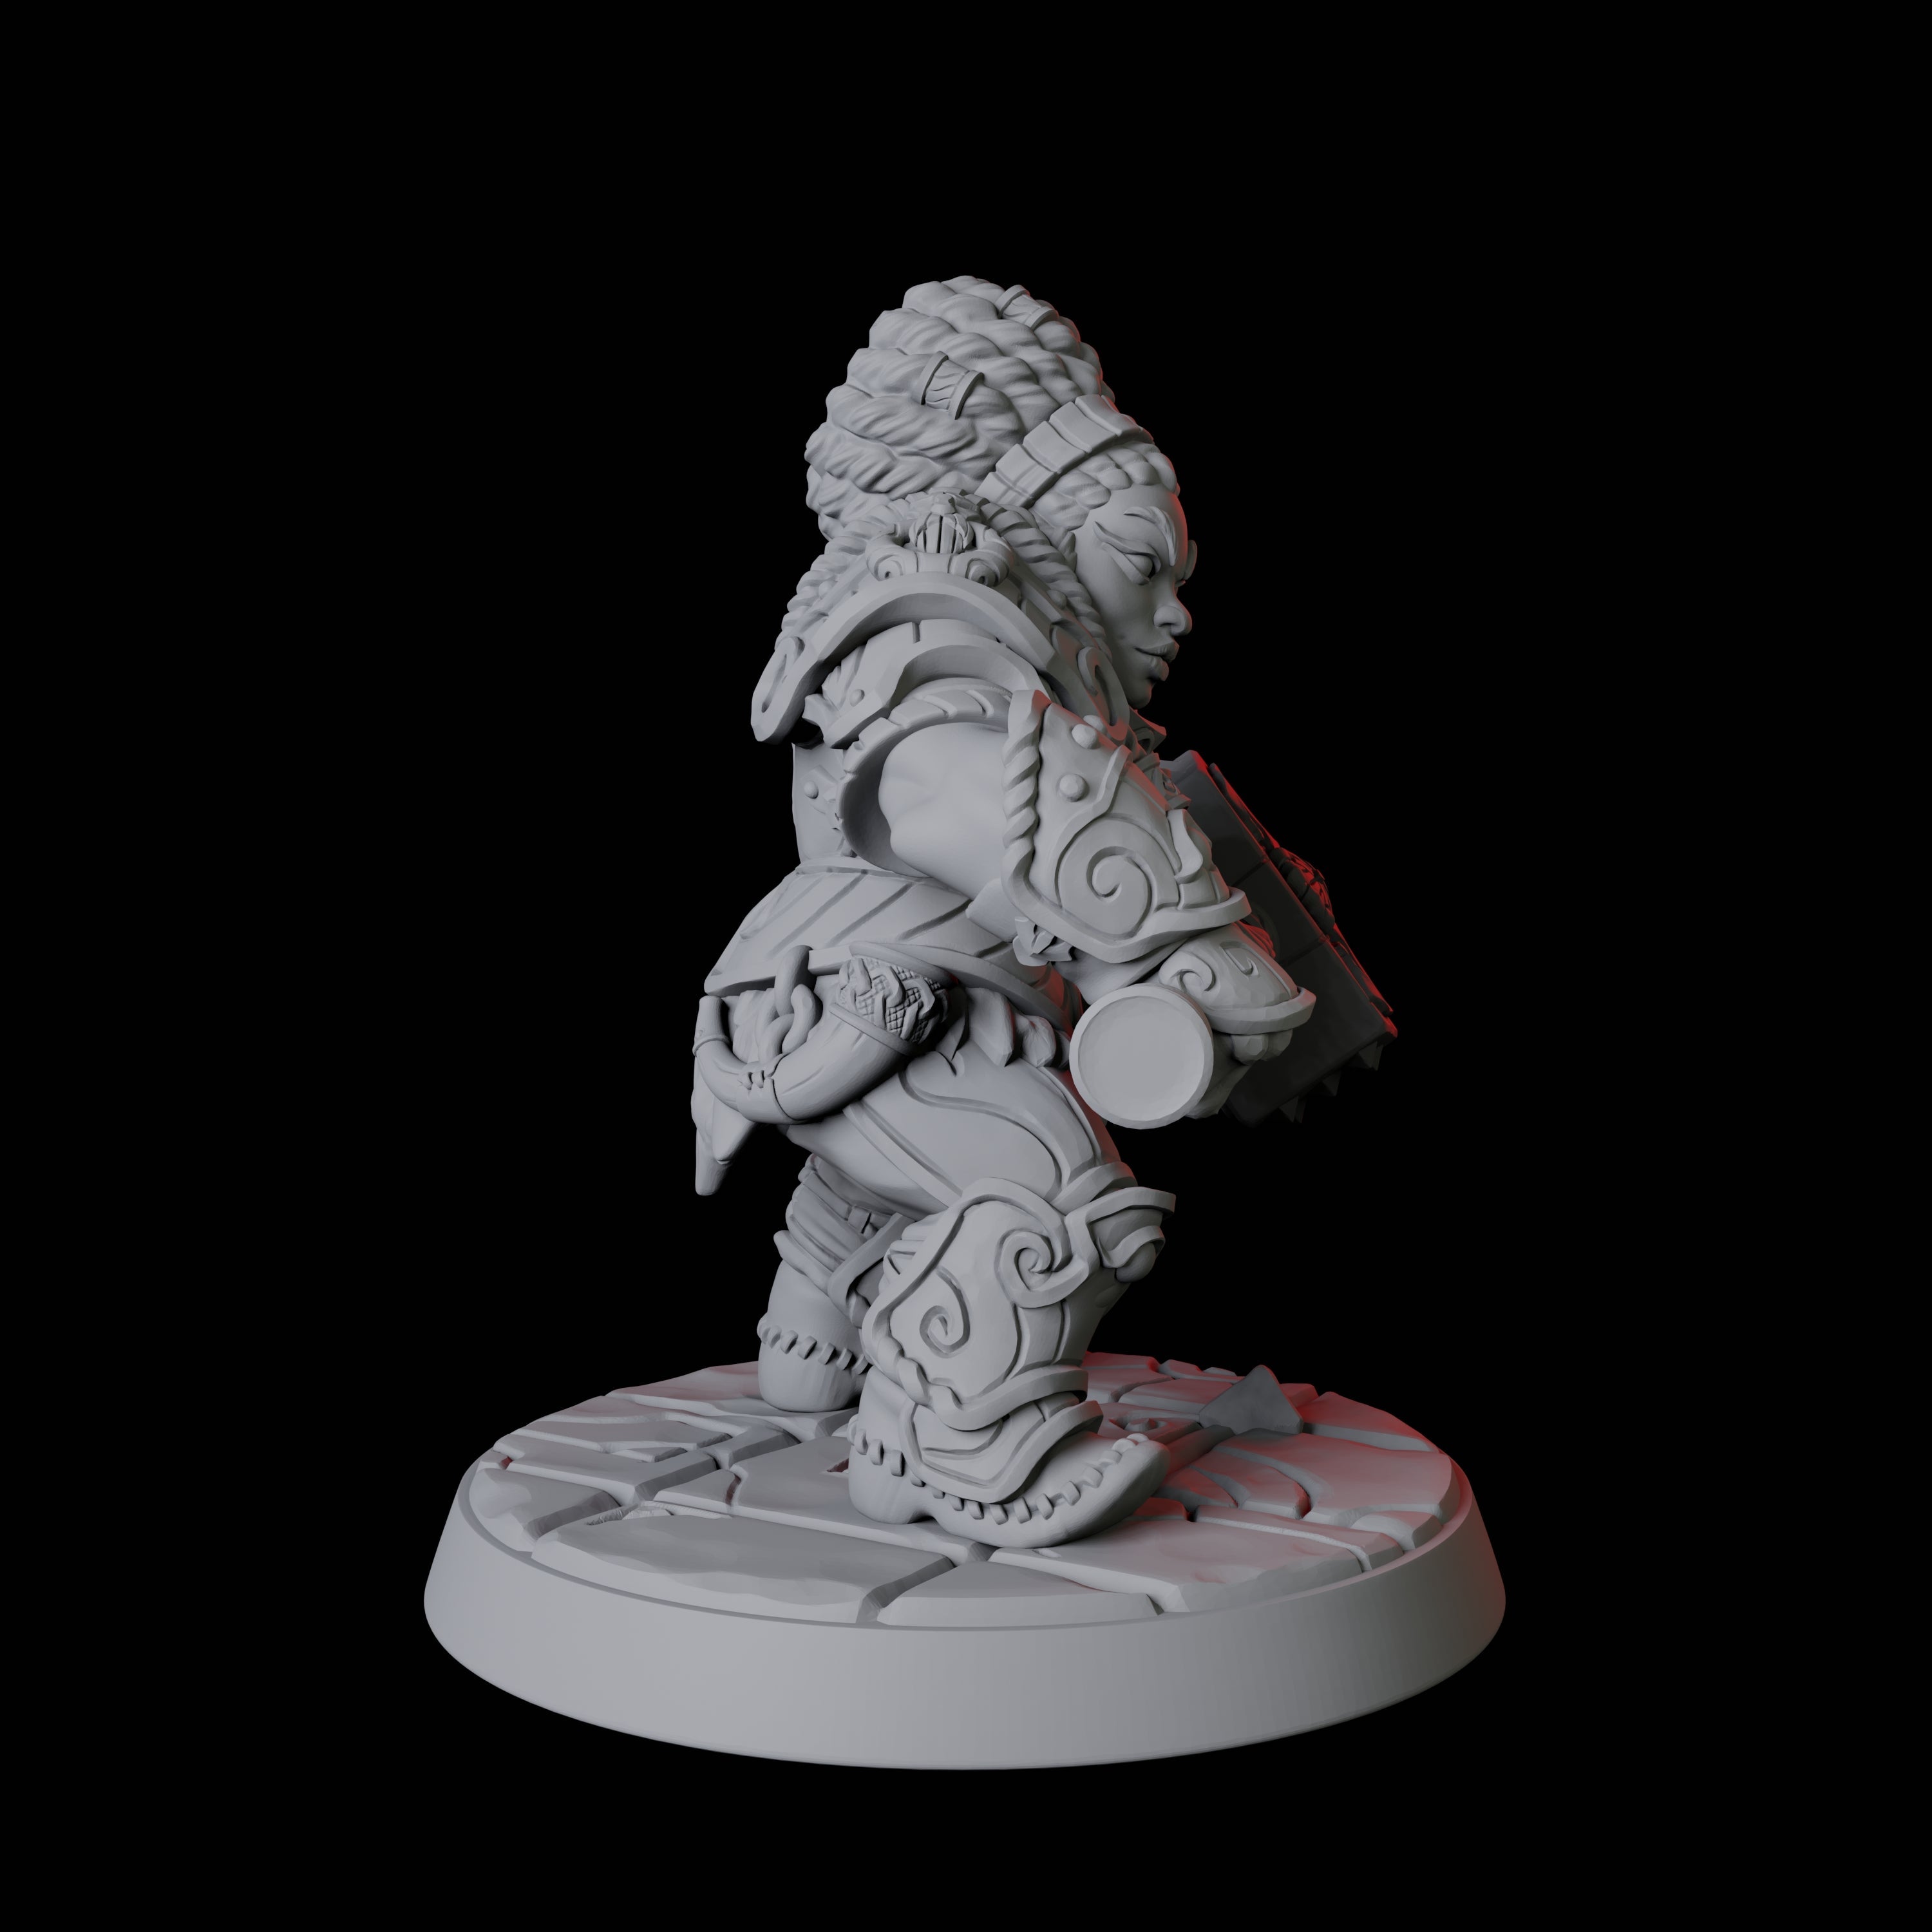 City Guard Dwarf E Miniature for Dungeons and Dragons, Pathfinder or other TTRPGs